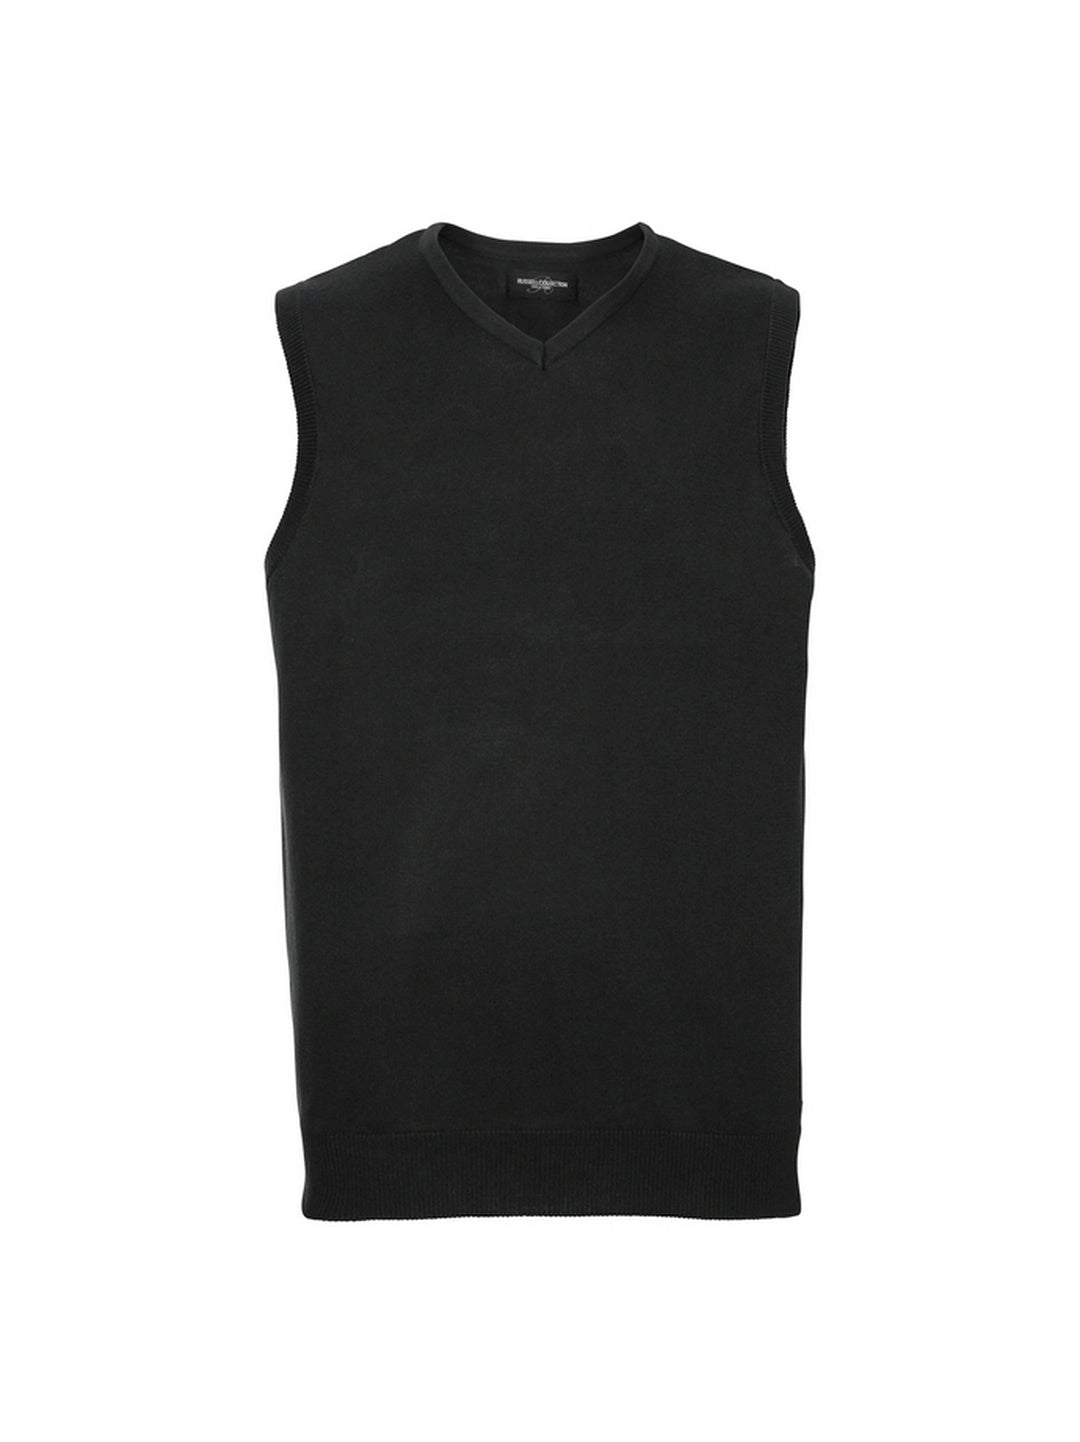 Russell Collection 716M Sleeveless Cotton Acrylic V-Neck Sweater - COOZO